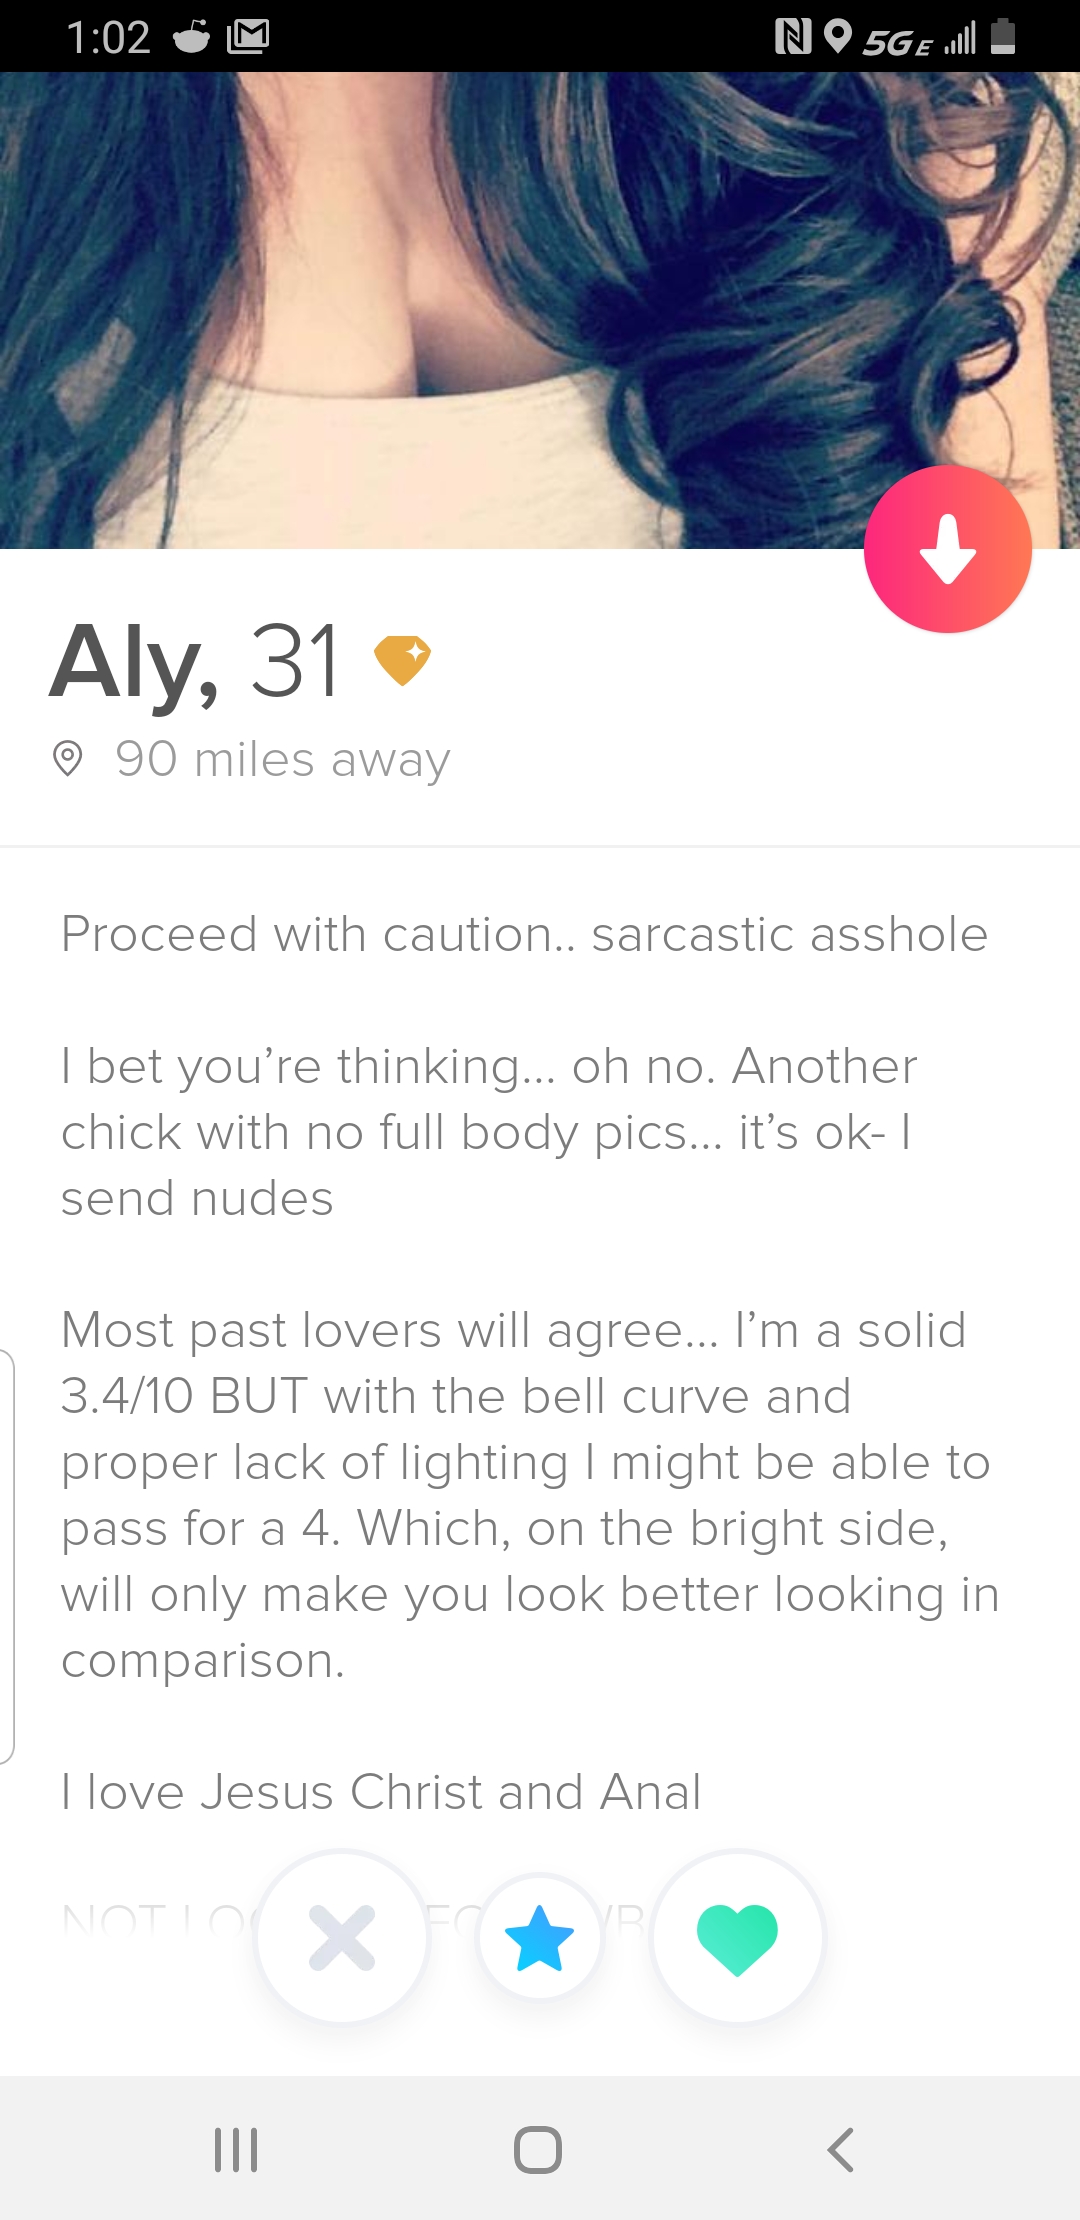 beauty - No Sg.. Aly, 31 @ 90 miles away Proceed with caution sarcastic asshole I bet you're thinking... oh no. Another chick with no full body pics. it's ok send nudes Most past lovers will agree... I'm a solid 3.410 But with the bell curve and proper la